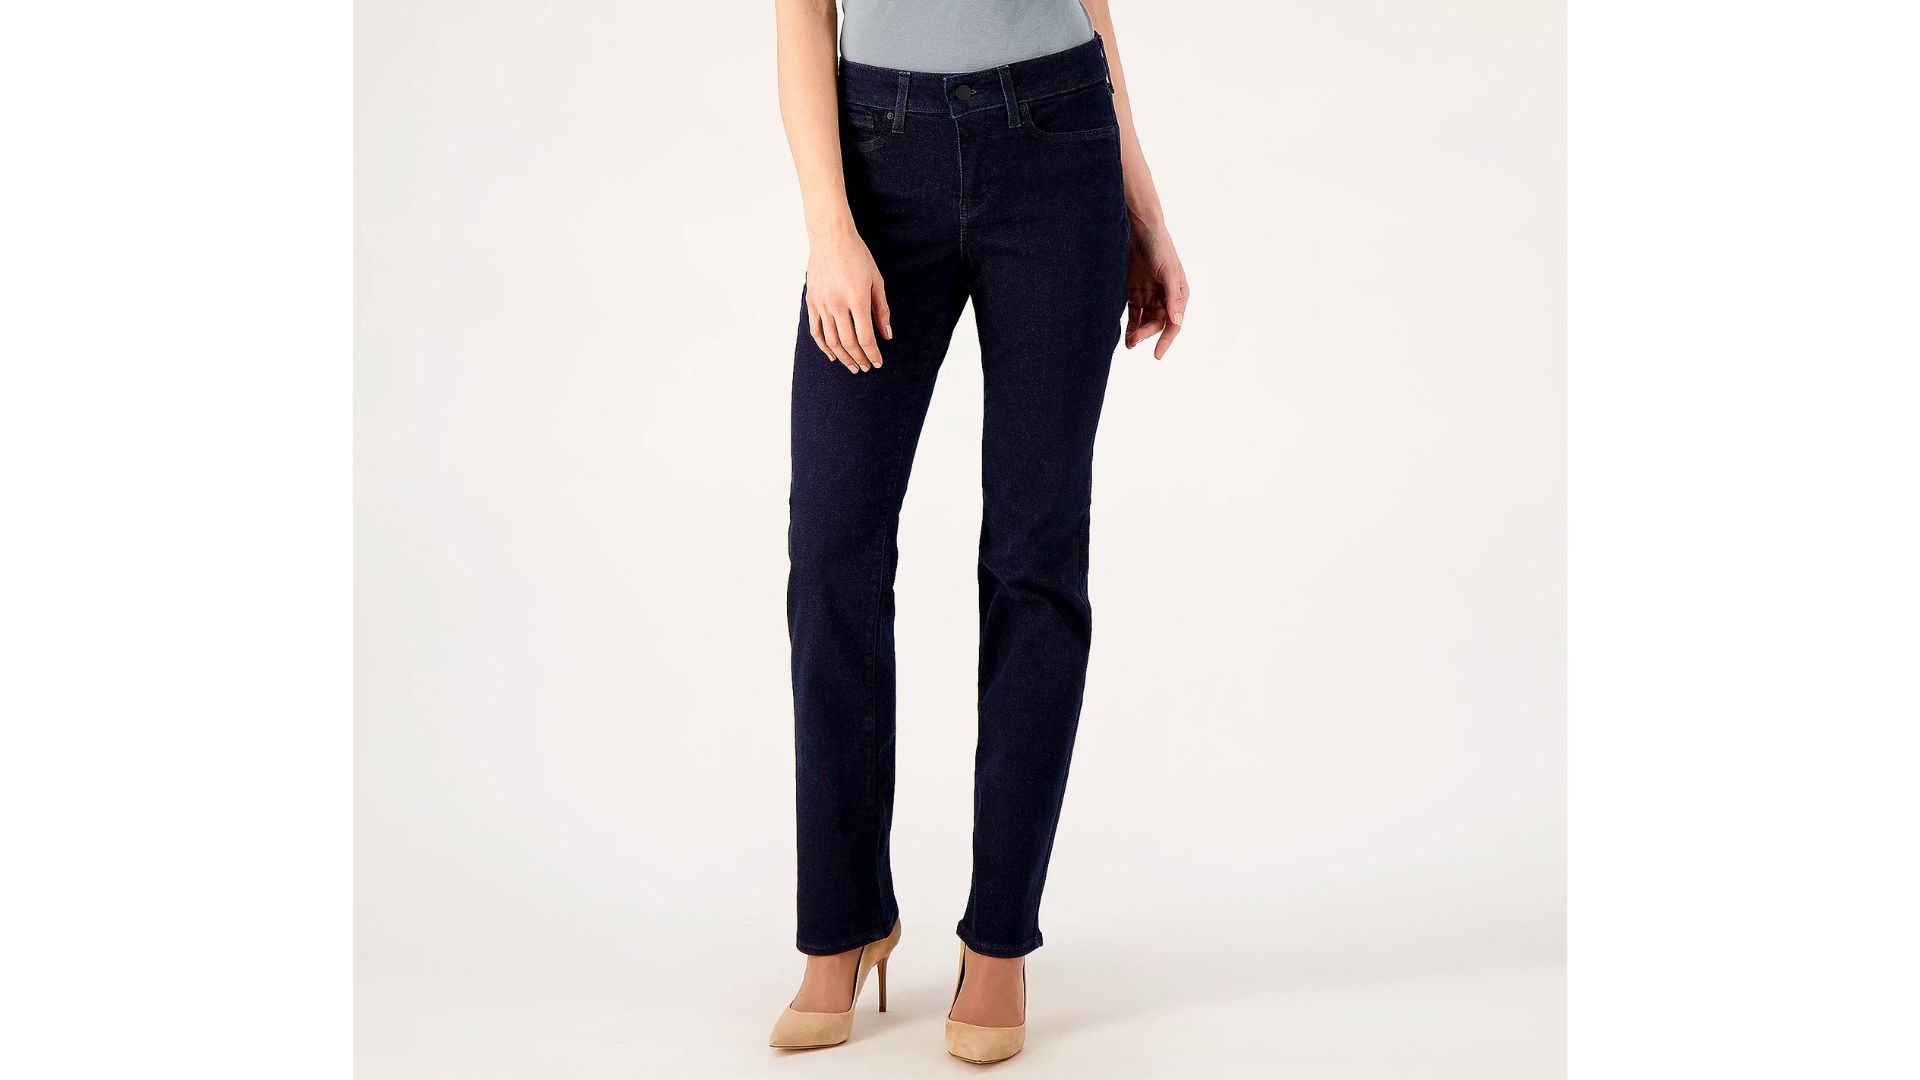 Best Denim Jeans for Women Over 50 | Find the Jean That's Right for You!